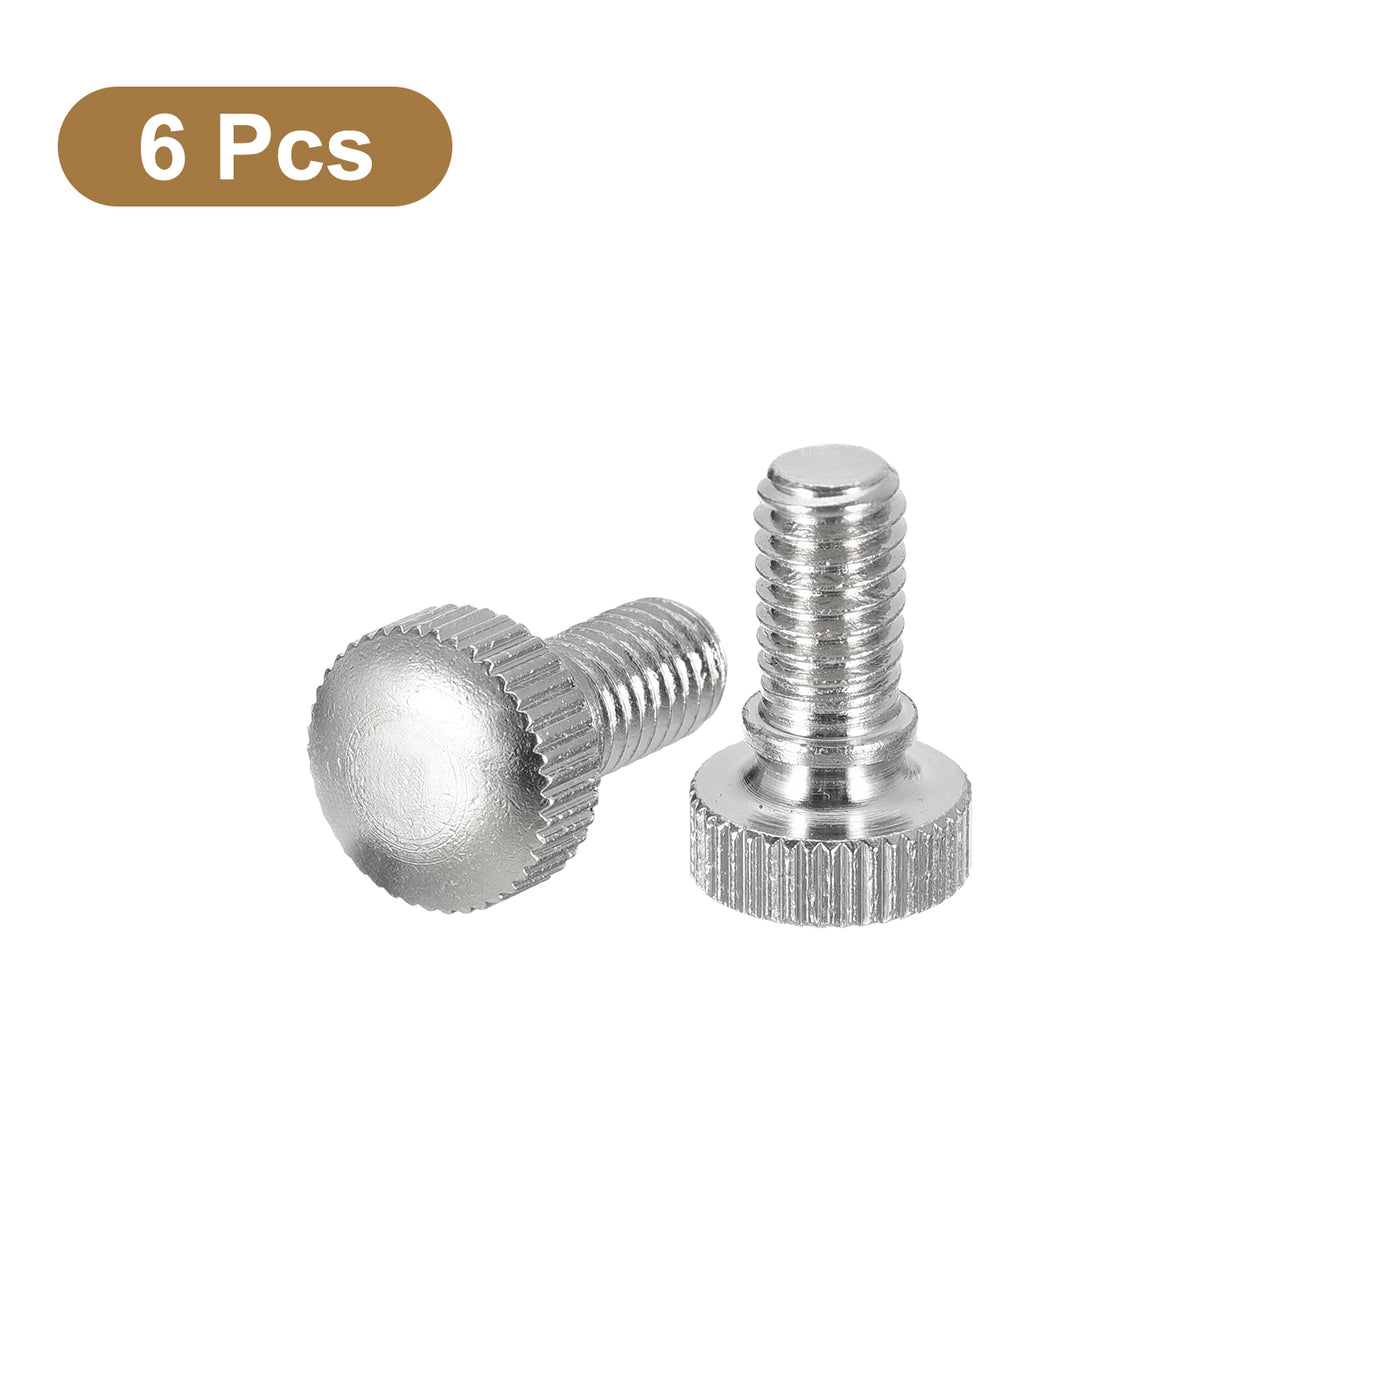 uxcell Uxcell M6x10mm Knurled Thumb Screws, 6pcs Brass Thumb Screws with Shoulder, Silver Tone